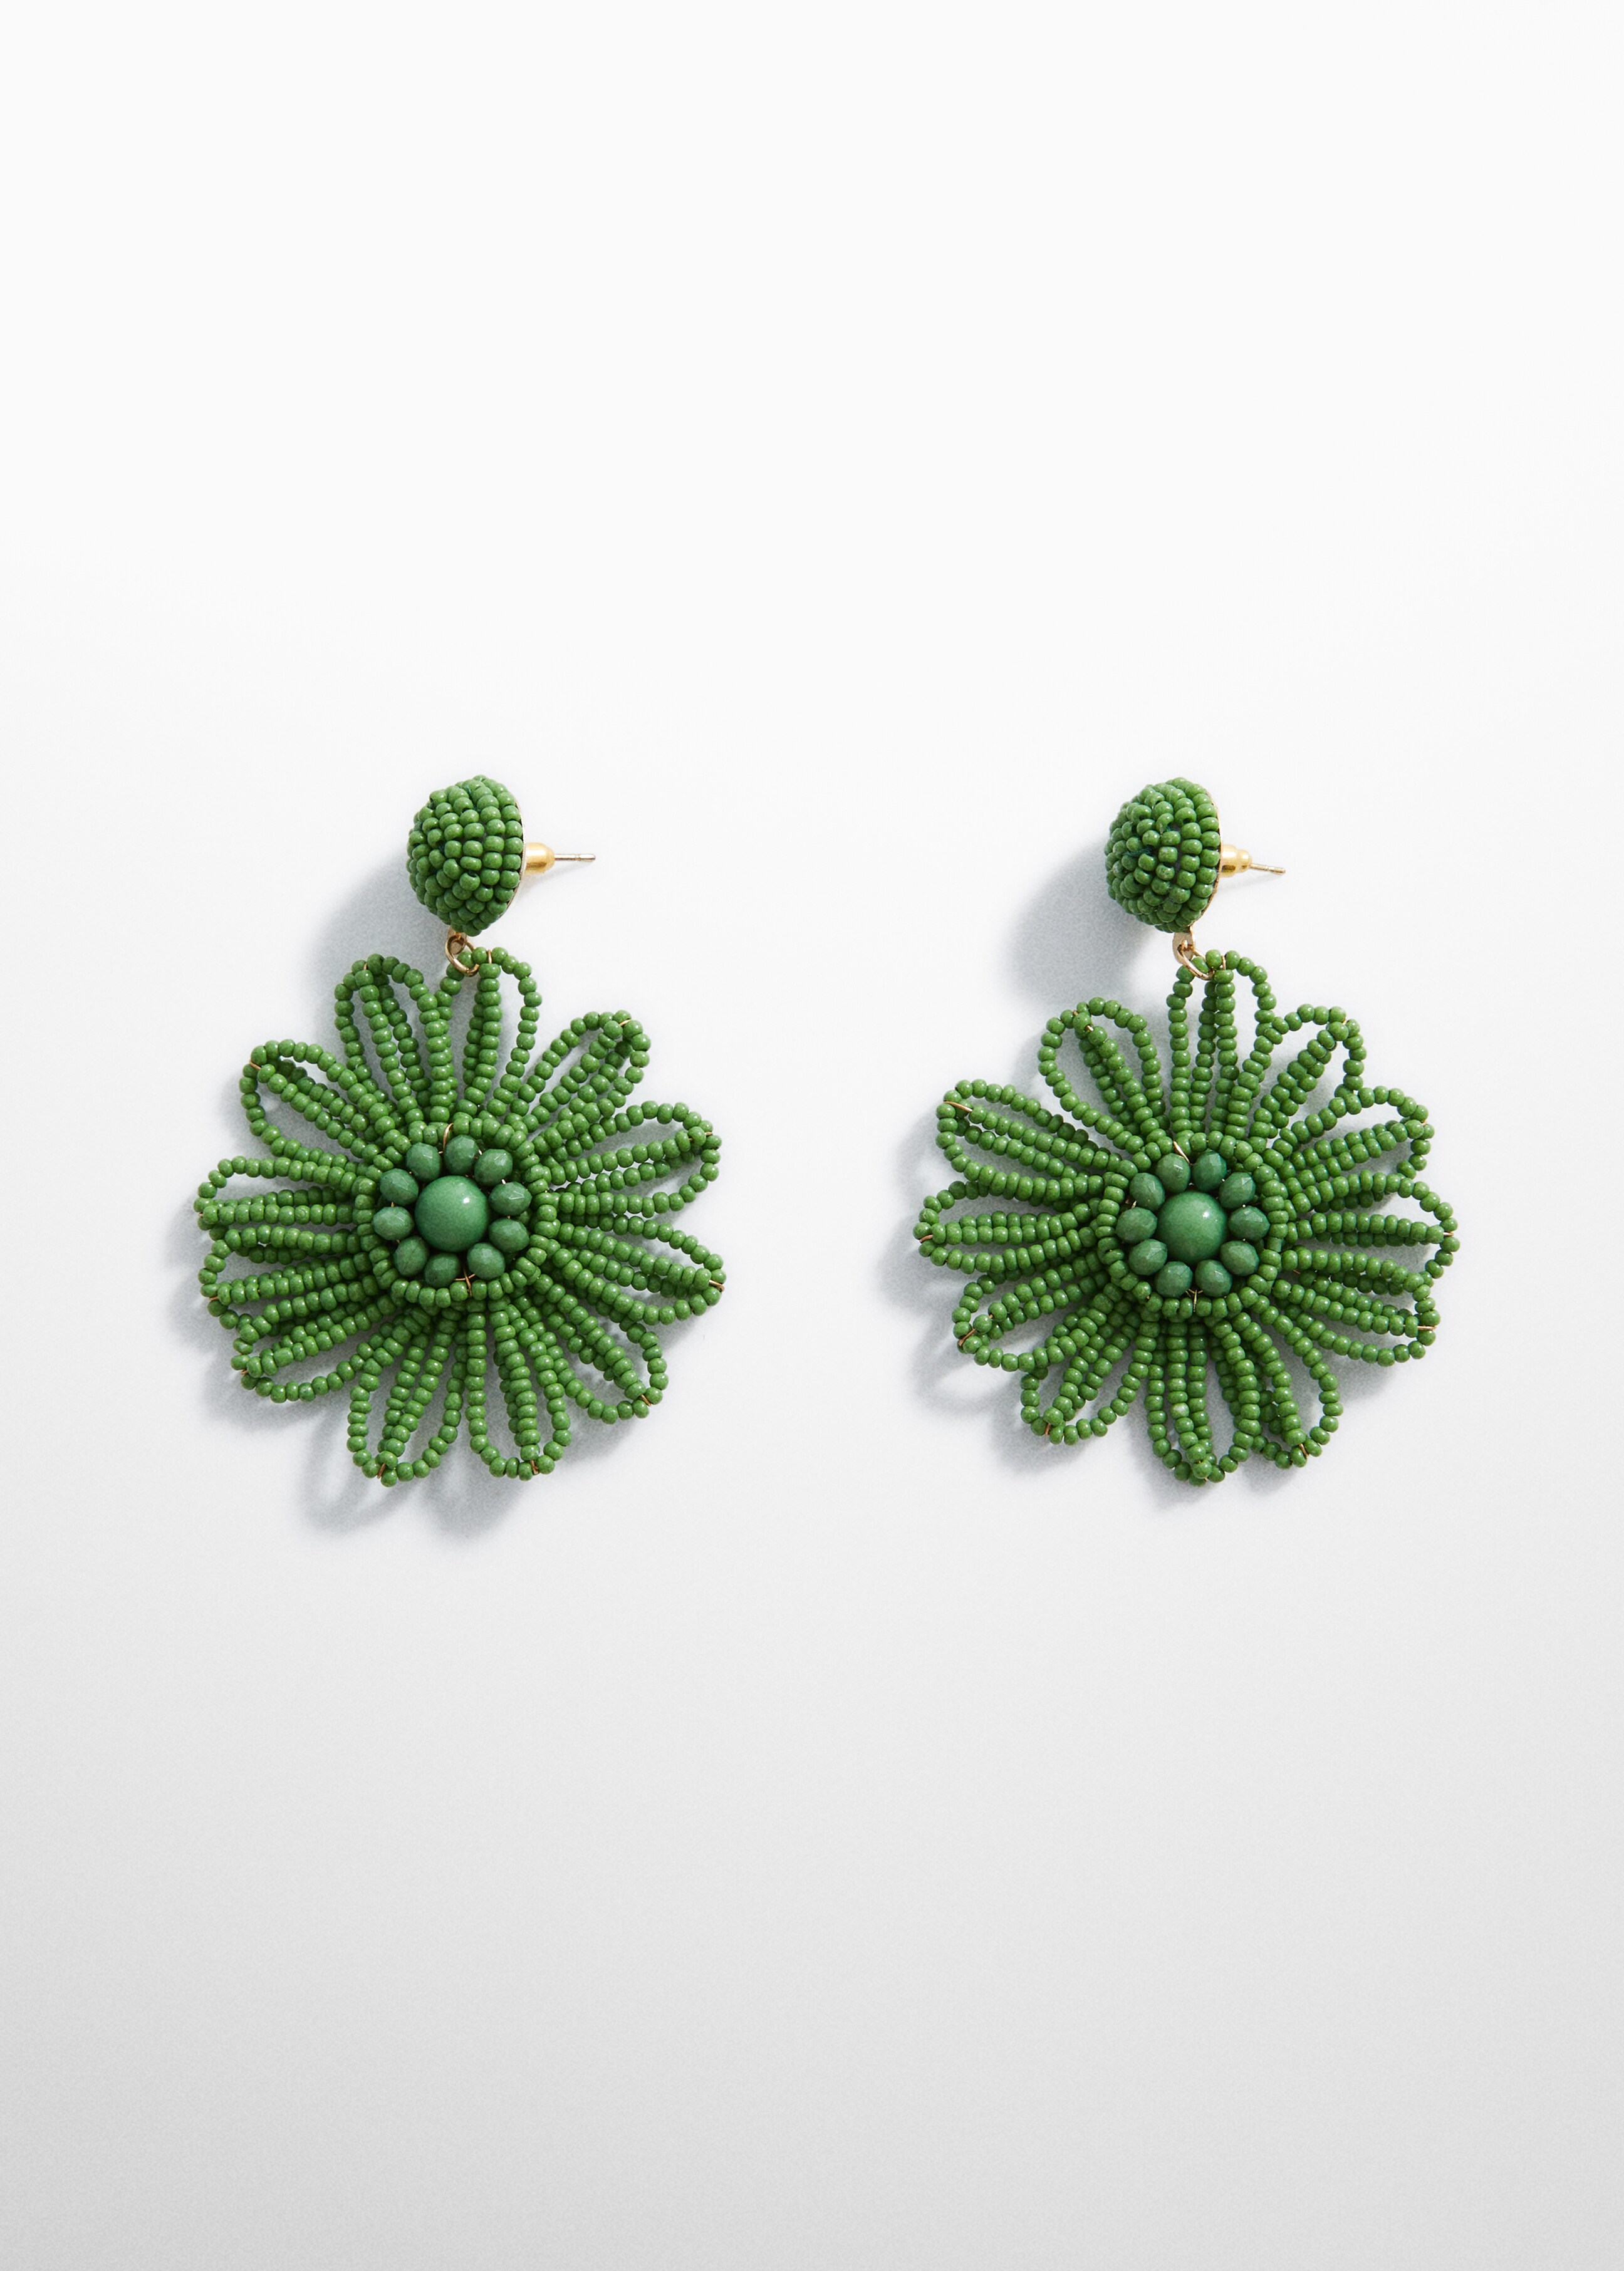 Flower beaded earrings - Article without model